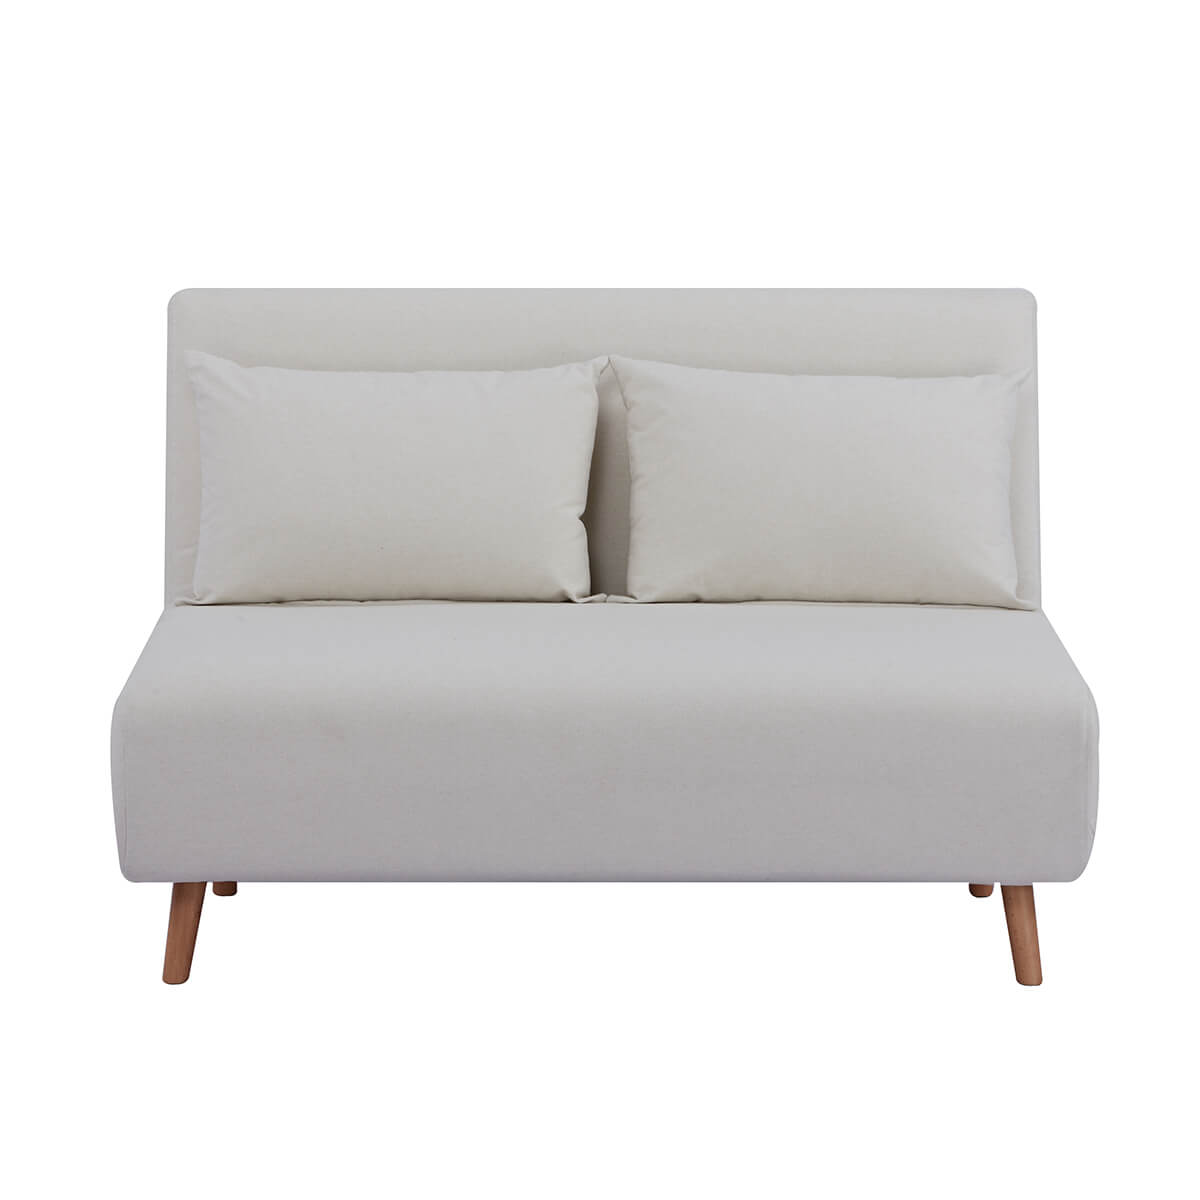 Seattle Double Click Clack Sofa Bed - Warm Natural - DUSK